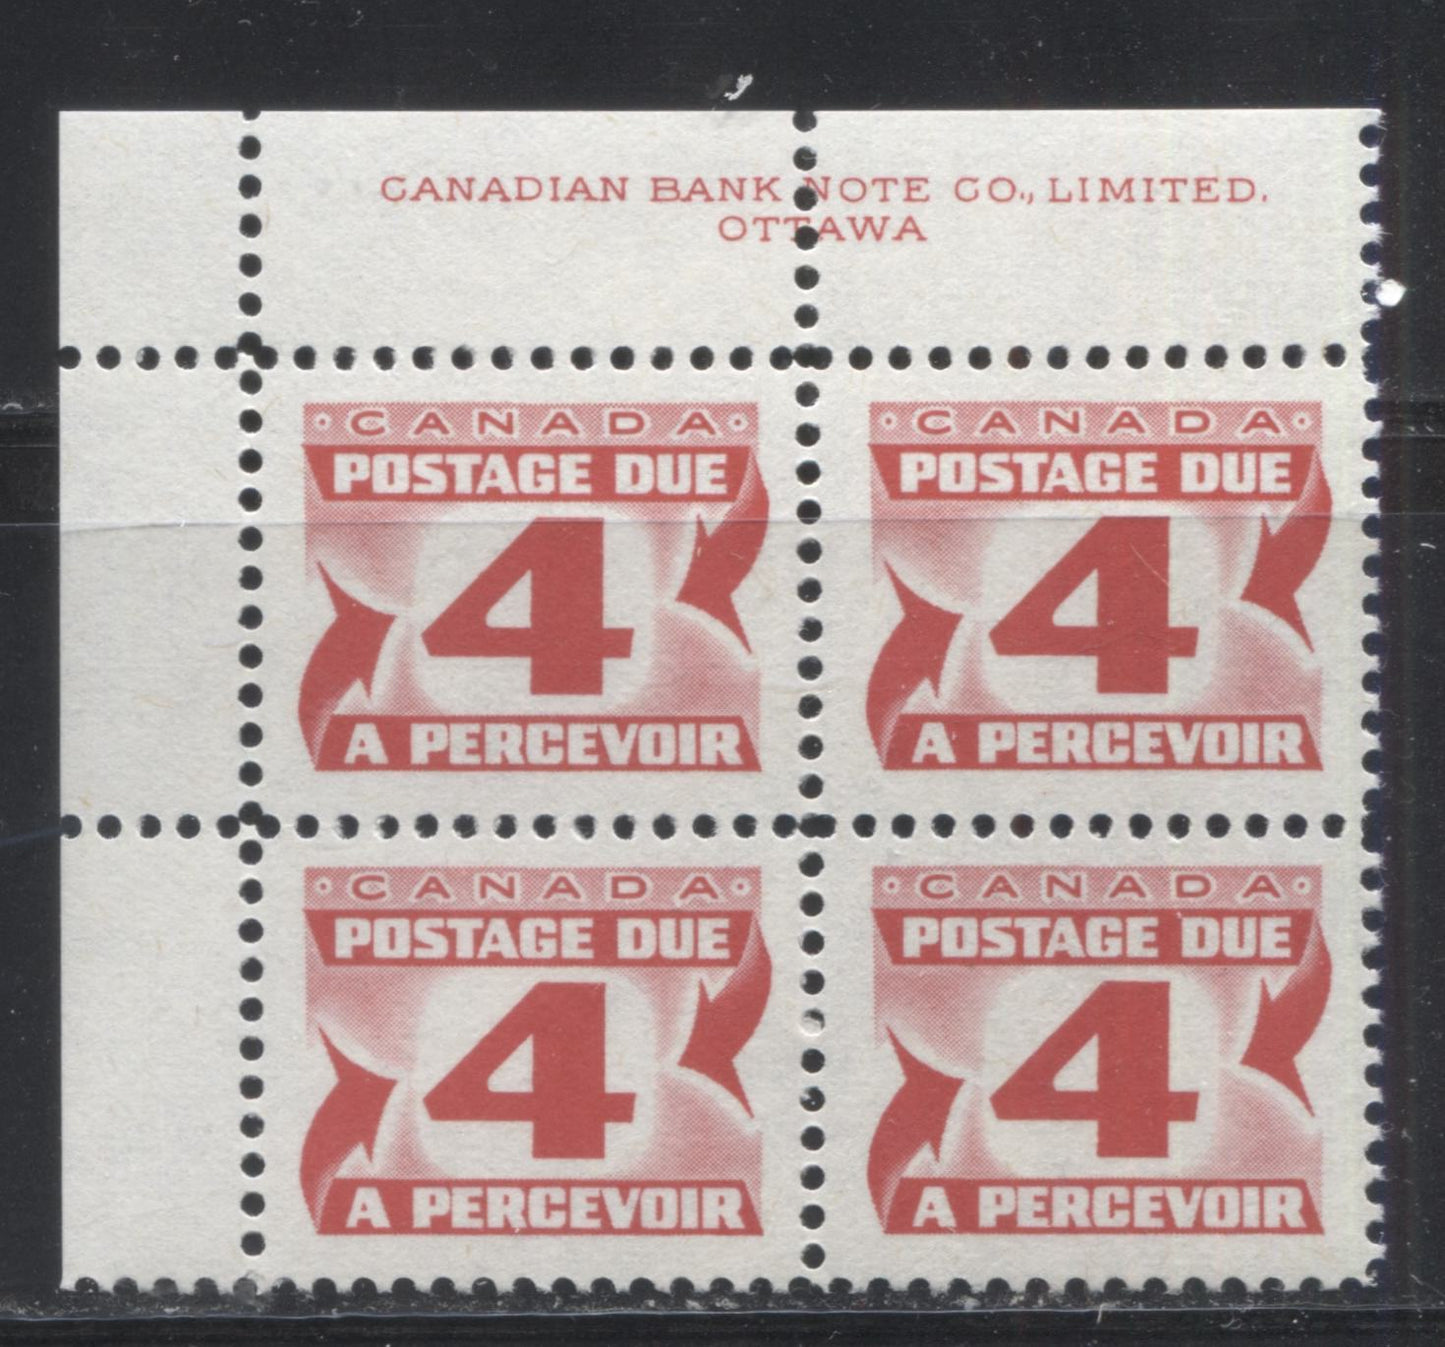 Lot 88 Canada #J31i 4c Carmine Rose 1973-1977, 3rd Centennial Postage Due Issue, A VFNH UL Inscription Block Of 4 On DF Grayish White Paper With PVA Gum, Perf 12